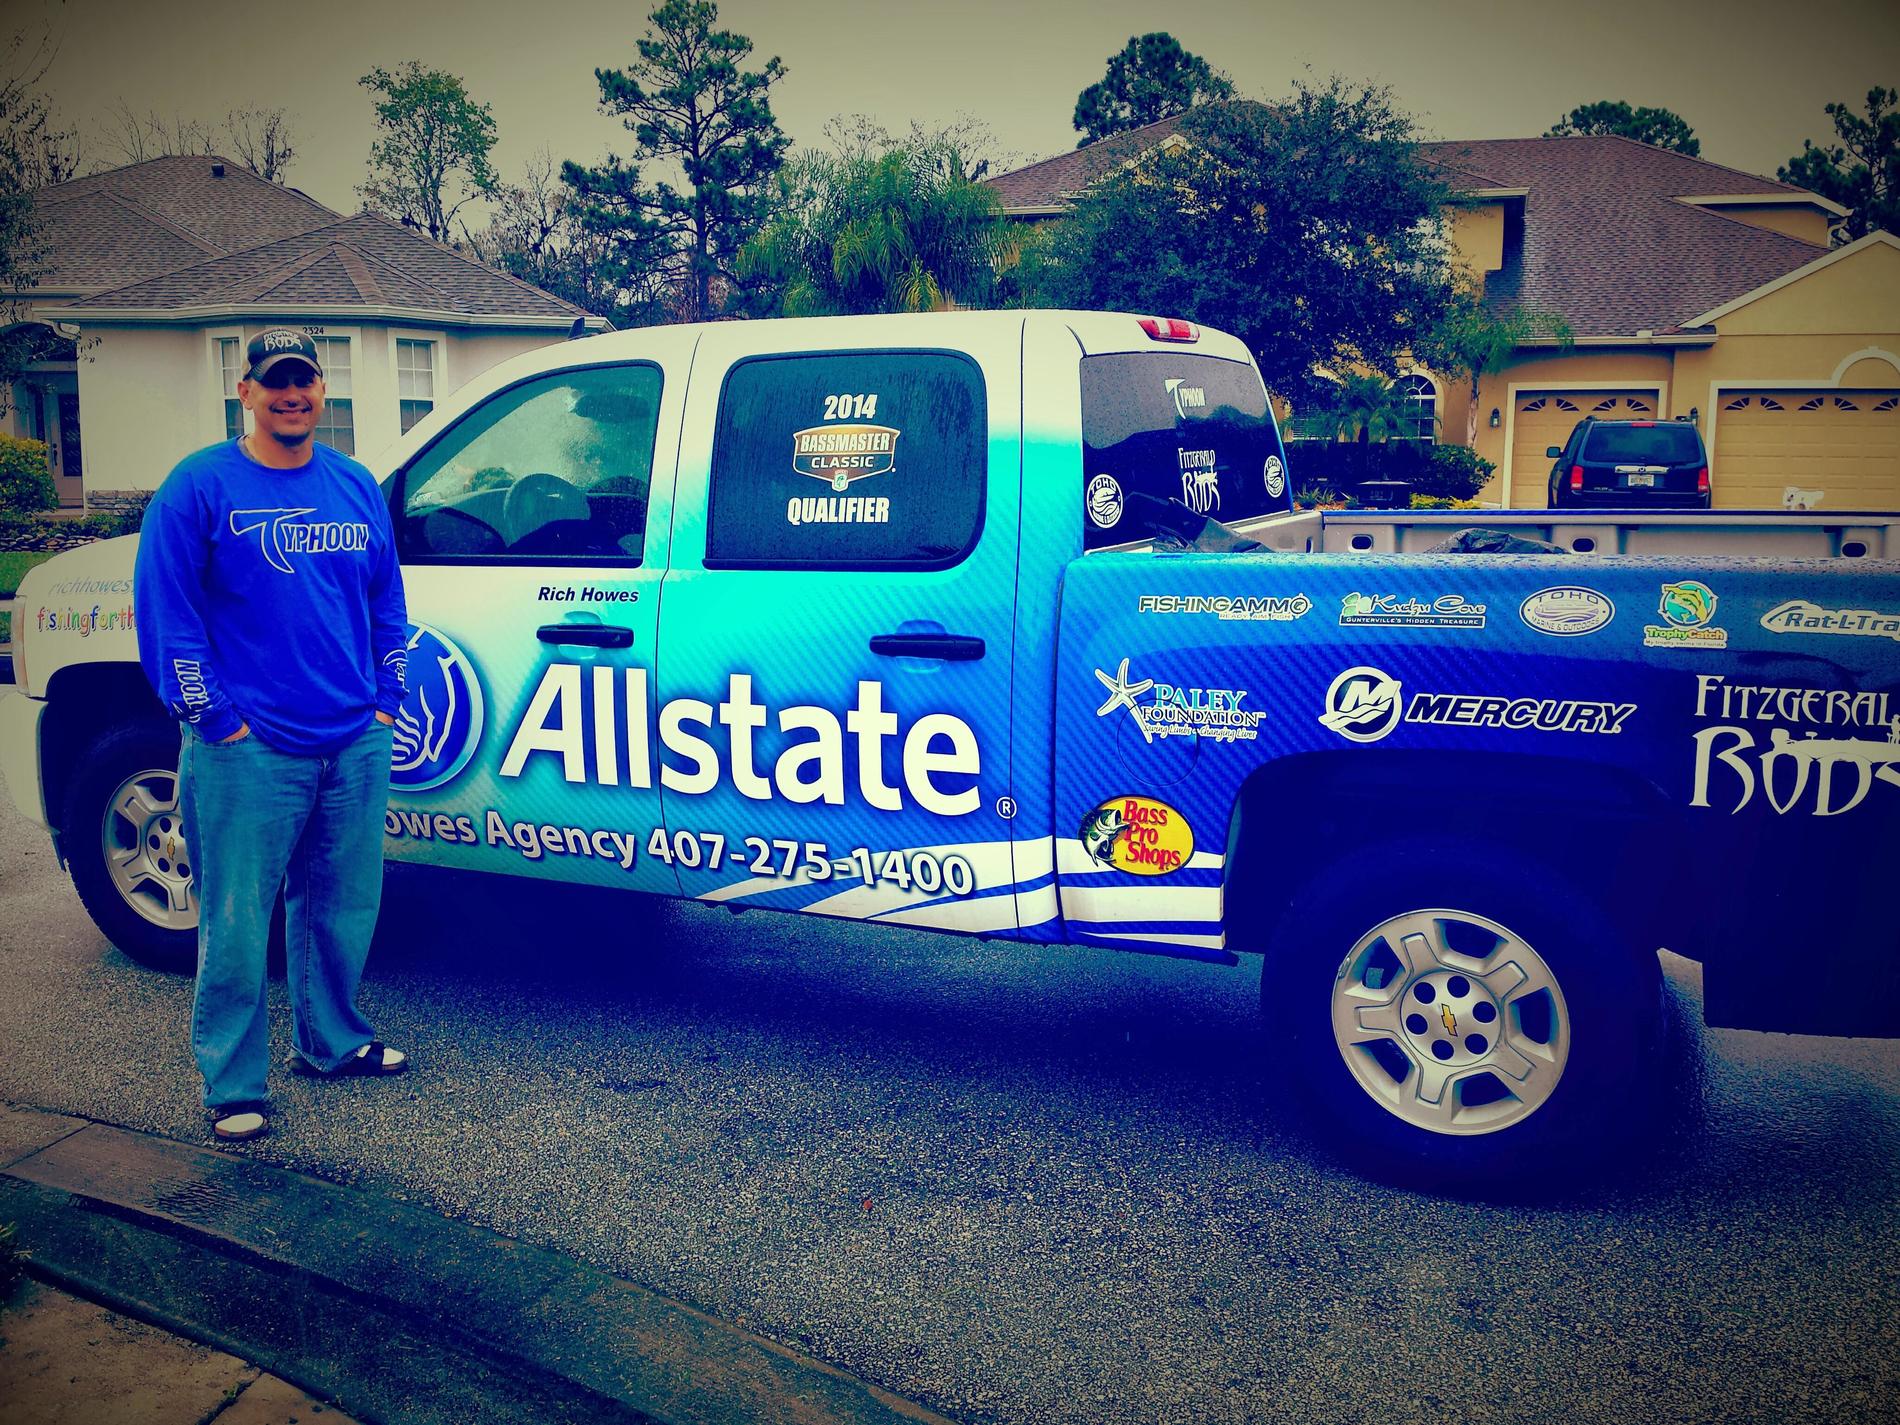 Images Rich Howes: Allstate Insurance